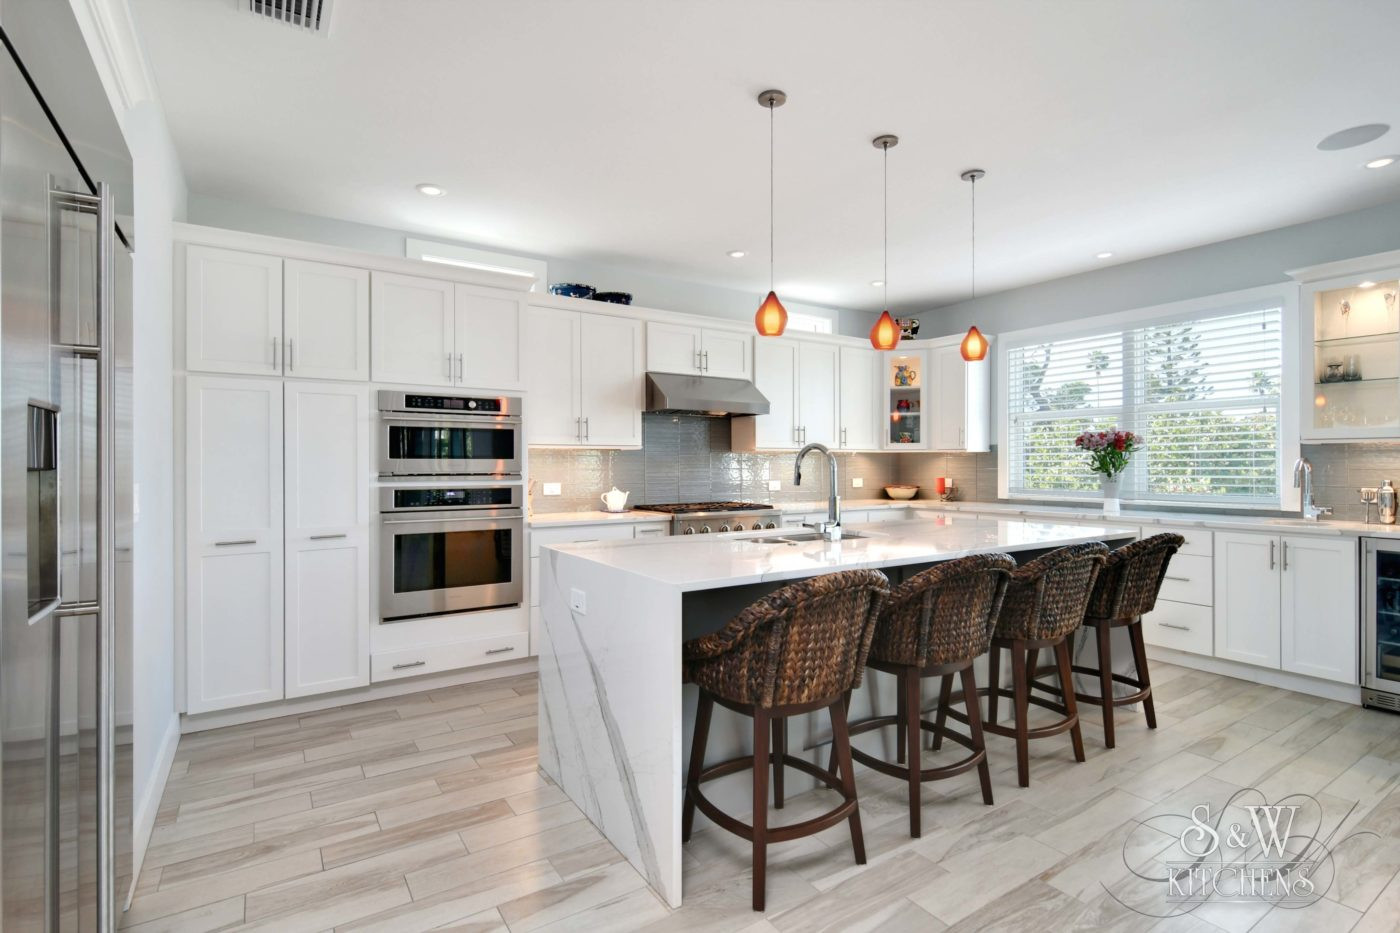 Kitchen Remodeling Contractors
 The Best Kitchen Remodeling Contractors in Tampa Home